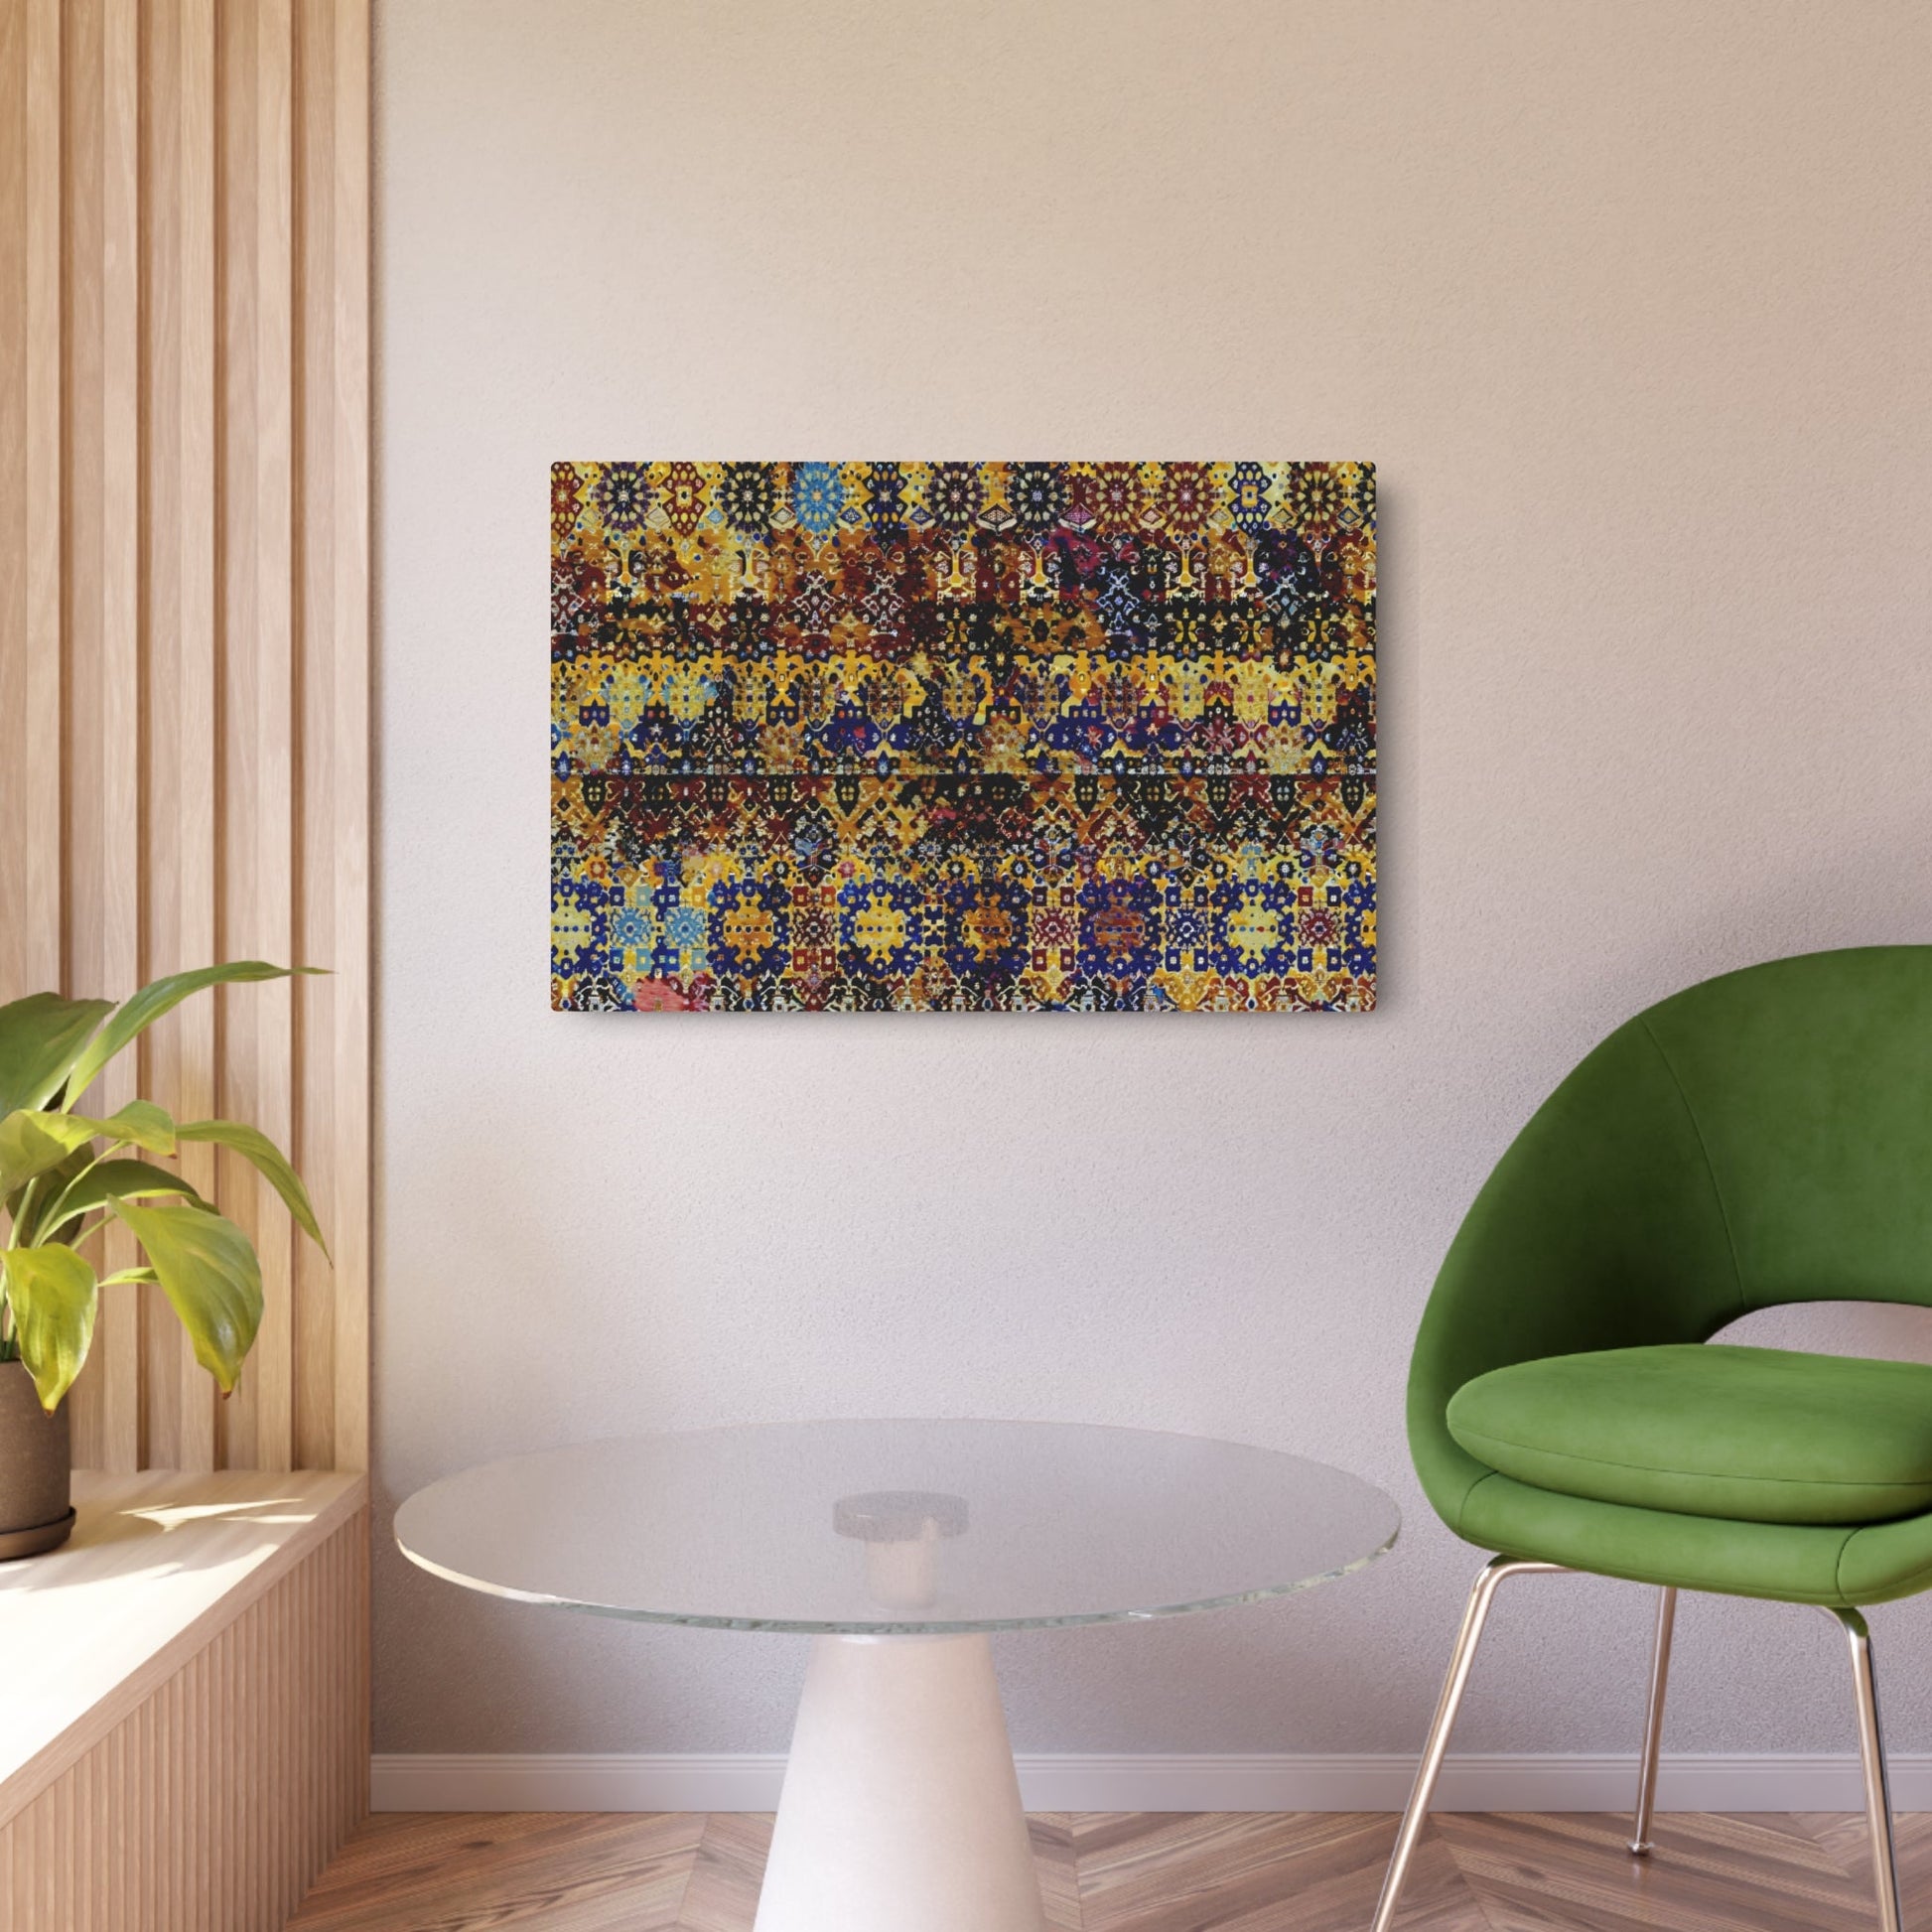 Metal Poster Art | "Indonesian Batik Style Artwork Featuring Intricate Patterns & Vibrant Colors - Non-Western Global Styles Collection" - Metal Poster Art 36″ x 24″ (Horizontal) 0.12''